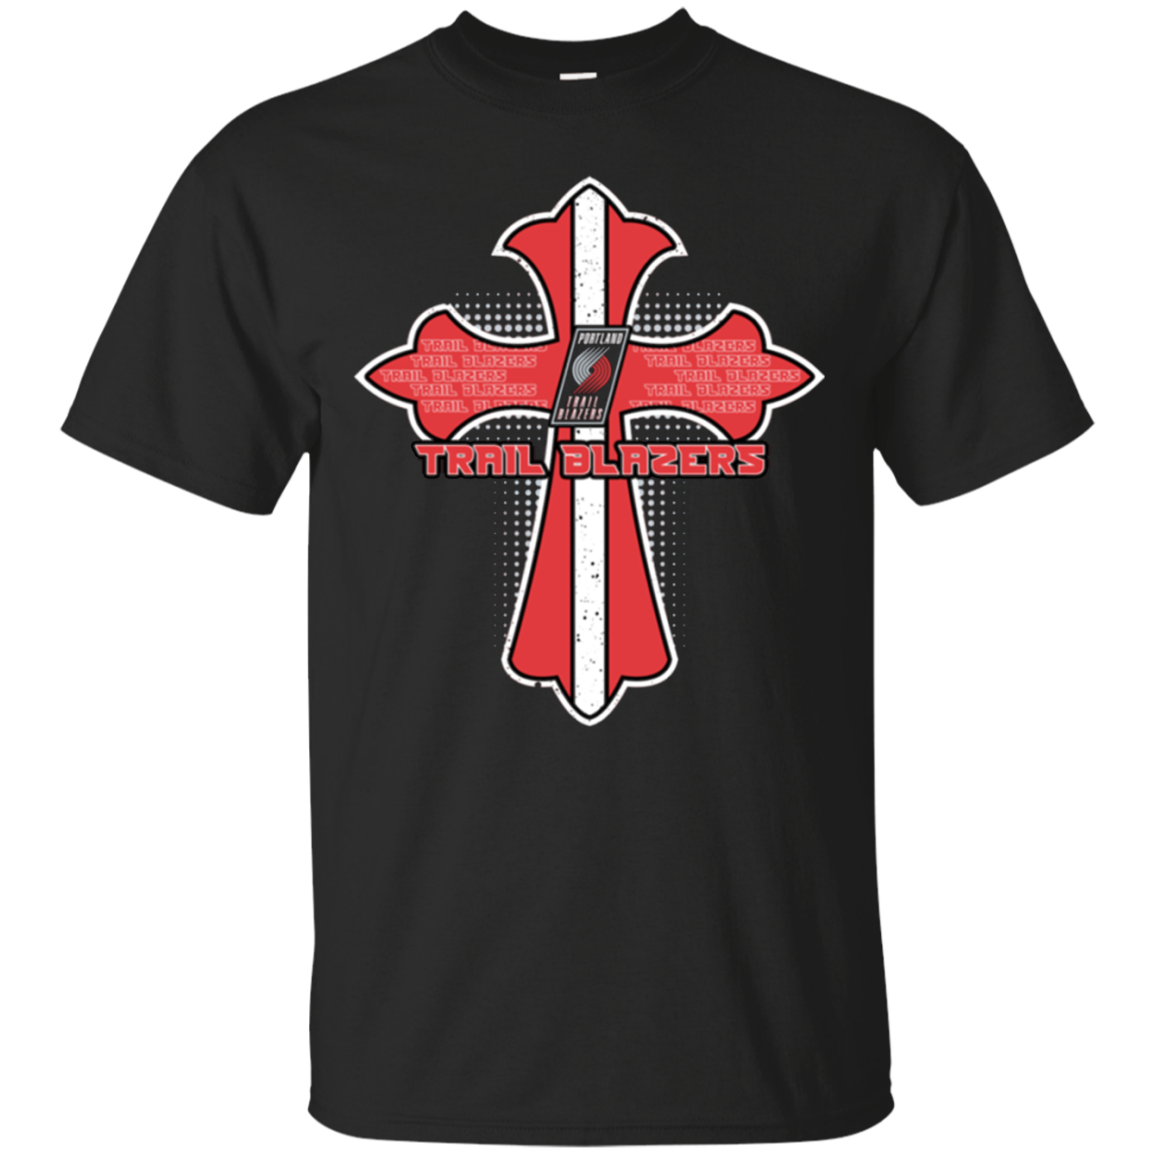 Cross Shirt For Jesus And Portland Trail Blazers Fans T - Shirt For 